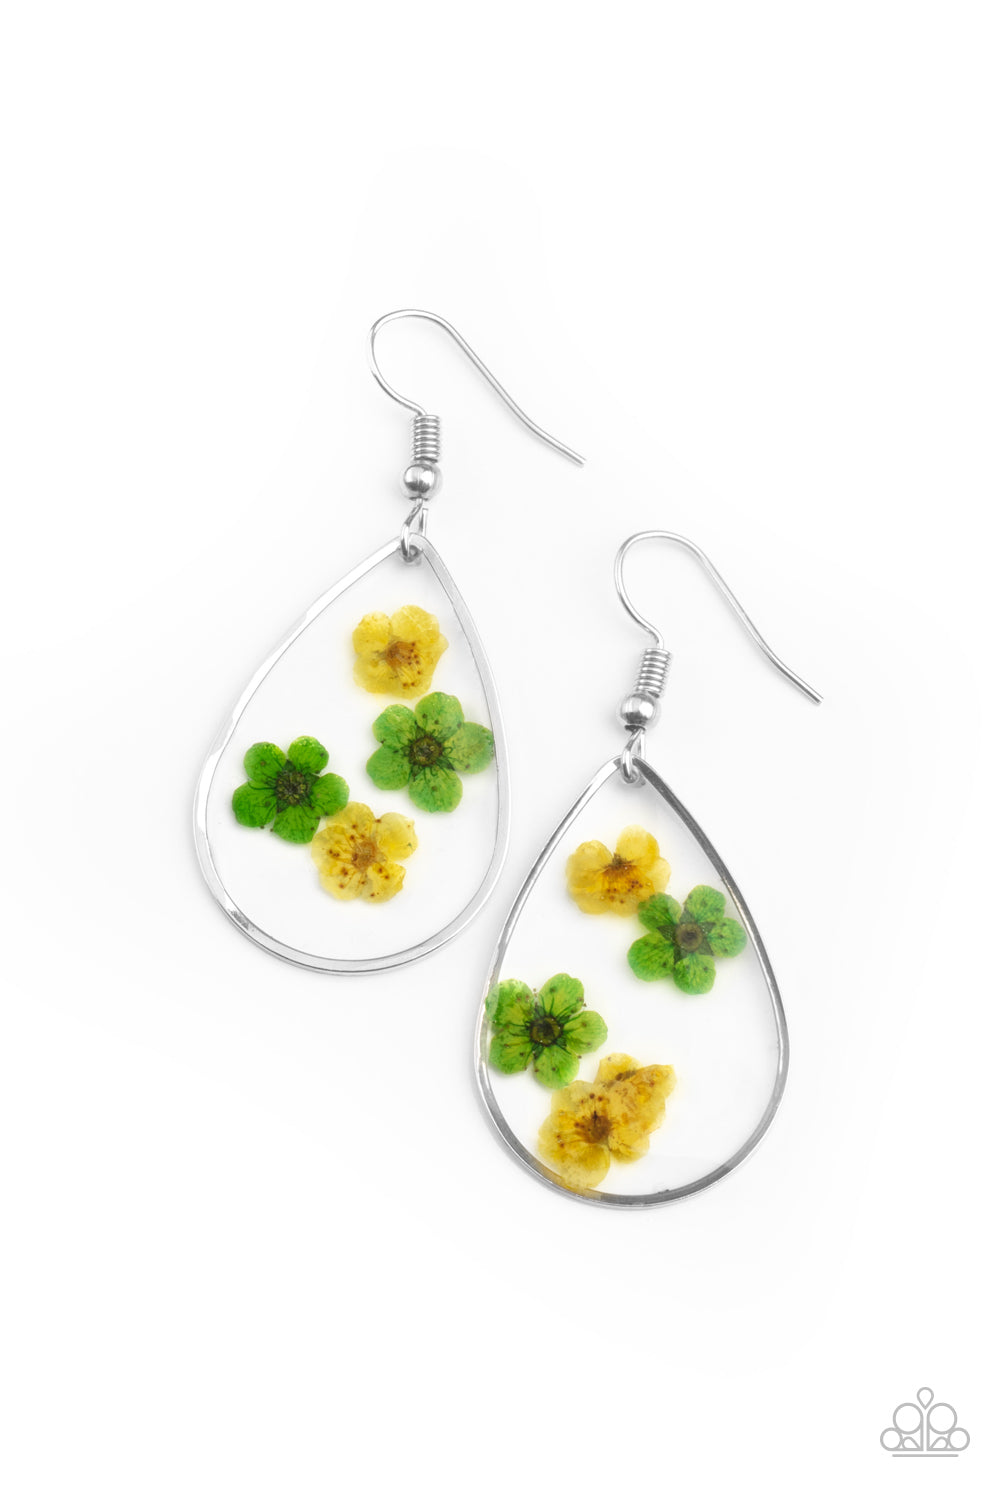 Paparazzi Accessories Perennial Prairie - Yellow Floral Earrings - Lady T Accessories